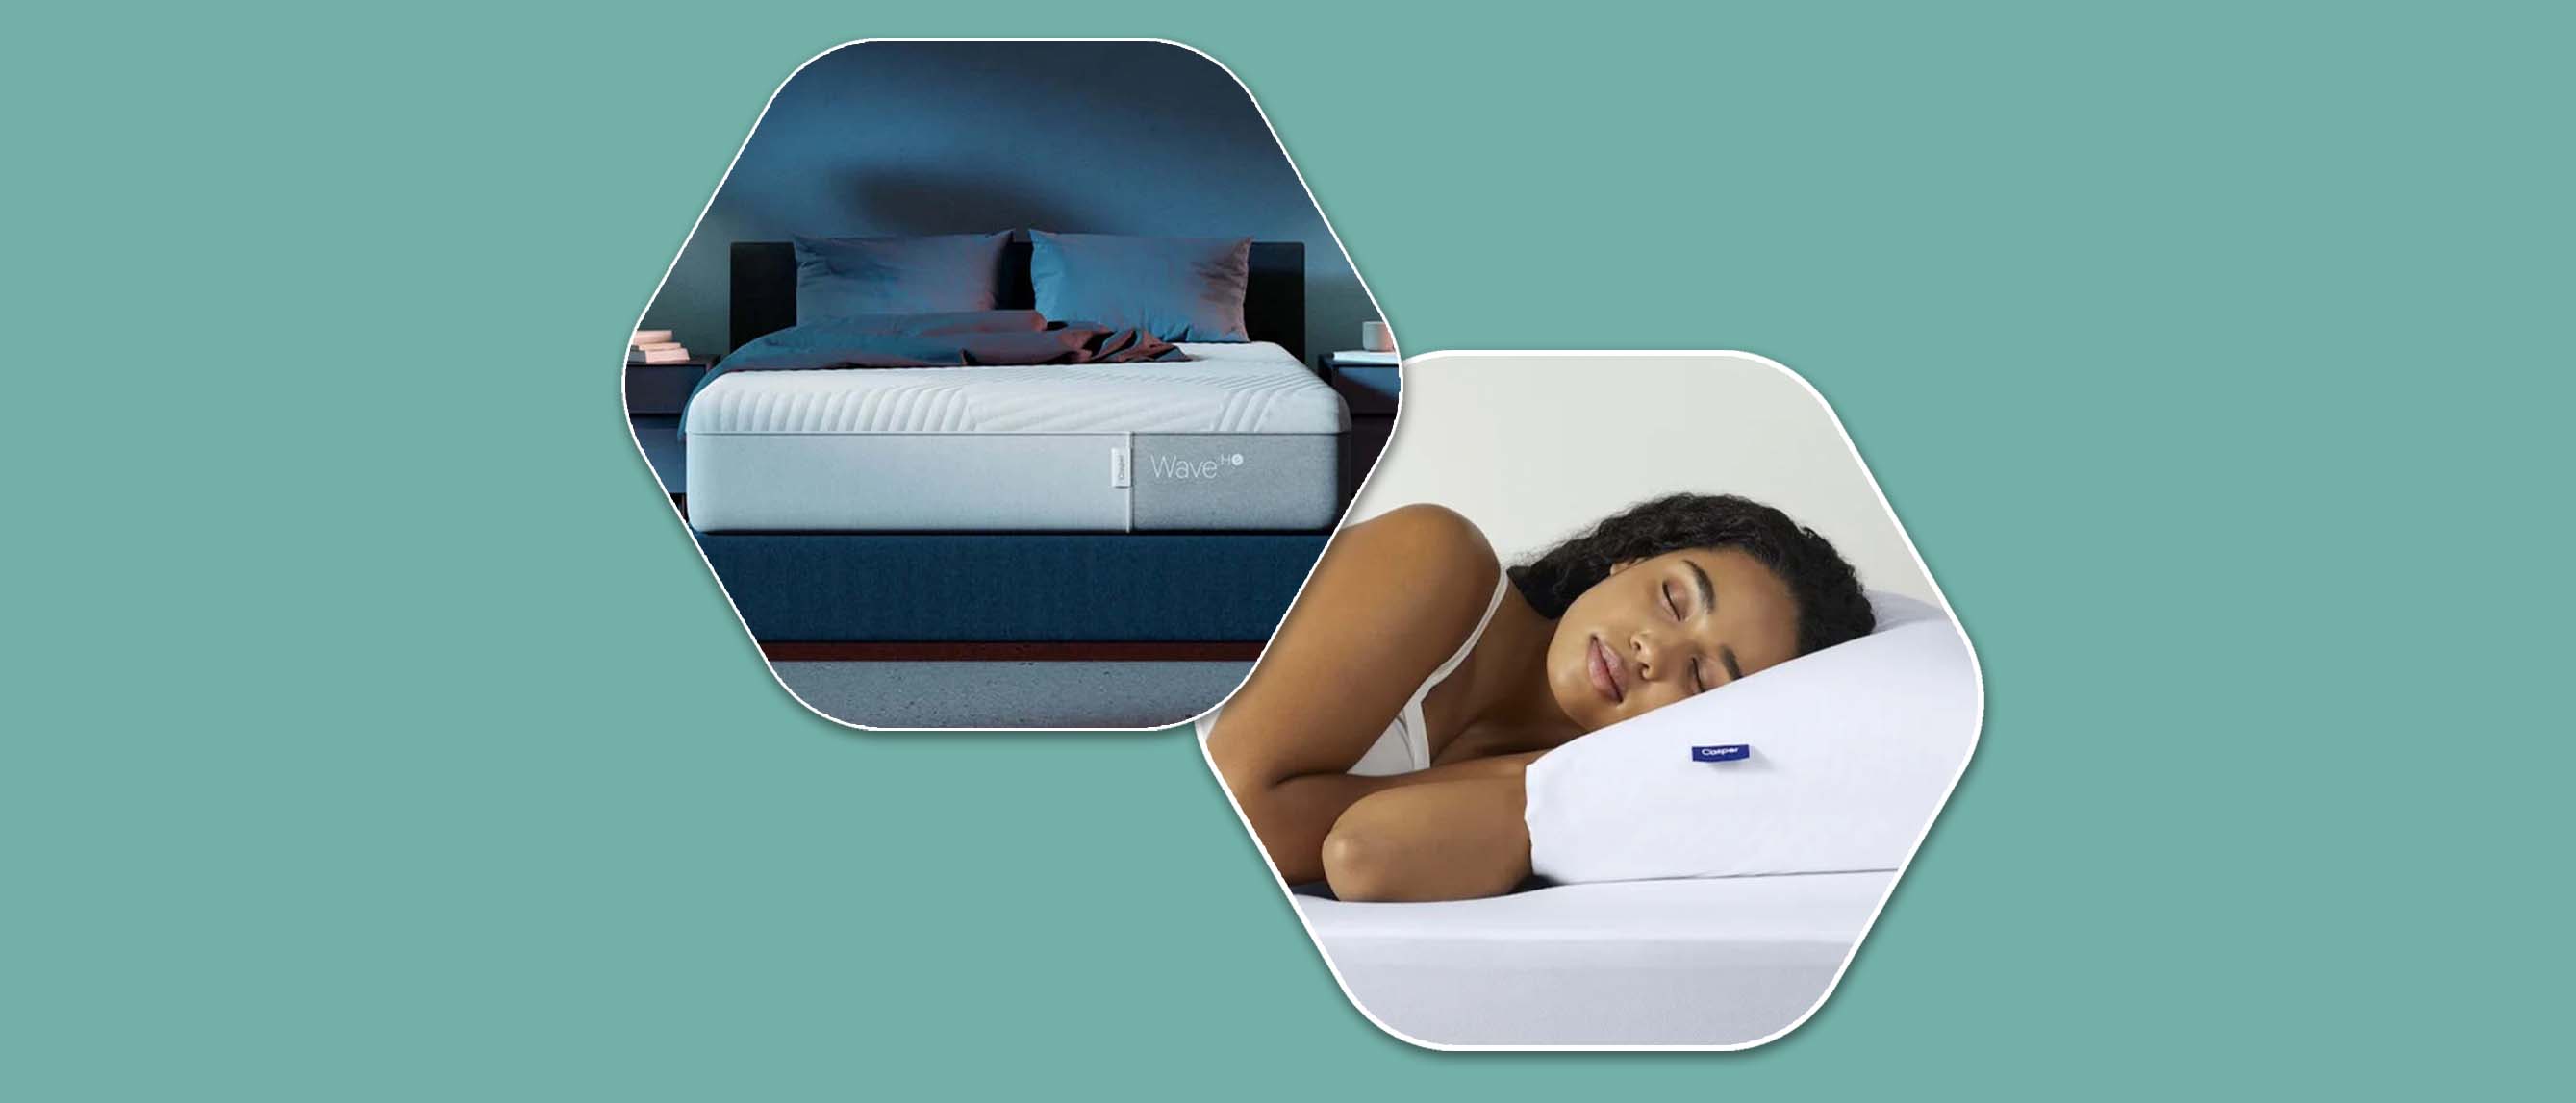 a picture of the wave mattress from Casper next to a model sleeping on a pillow